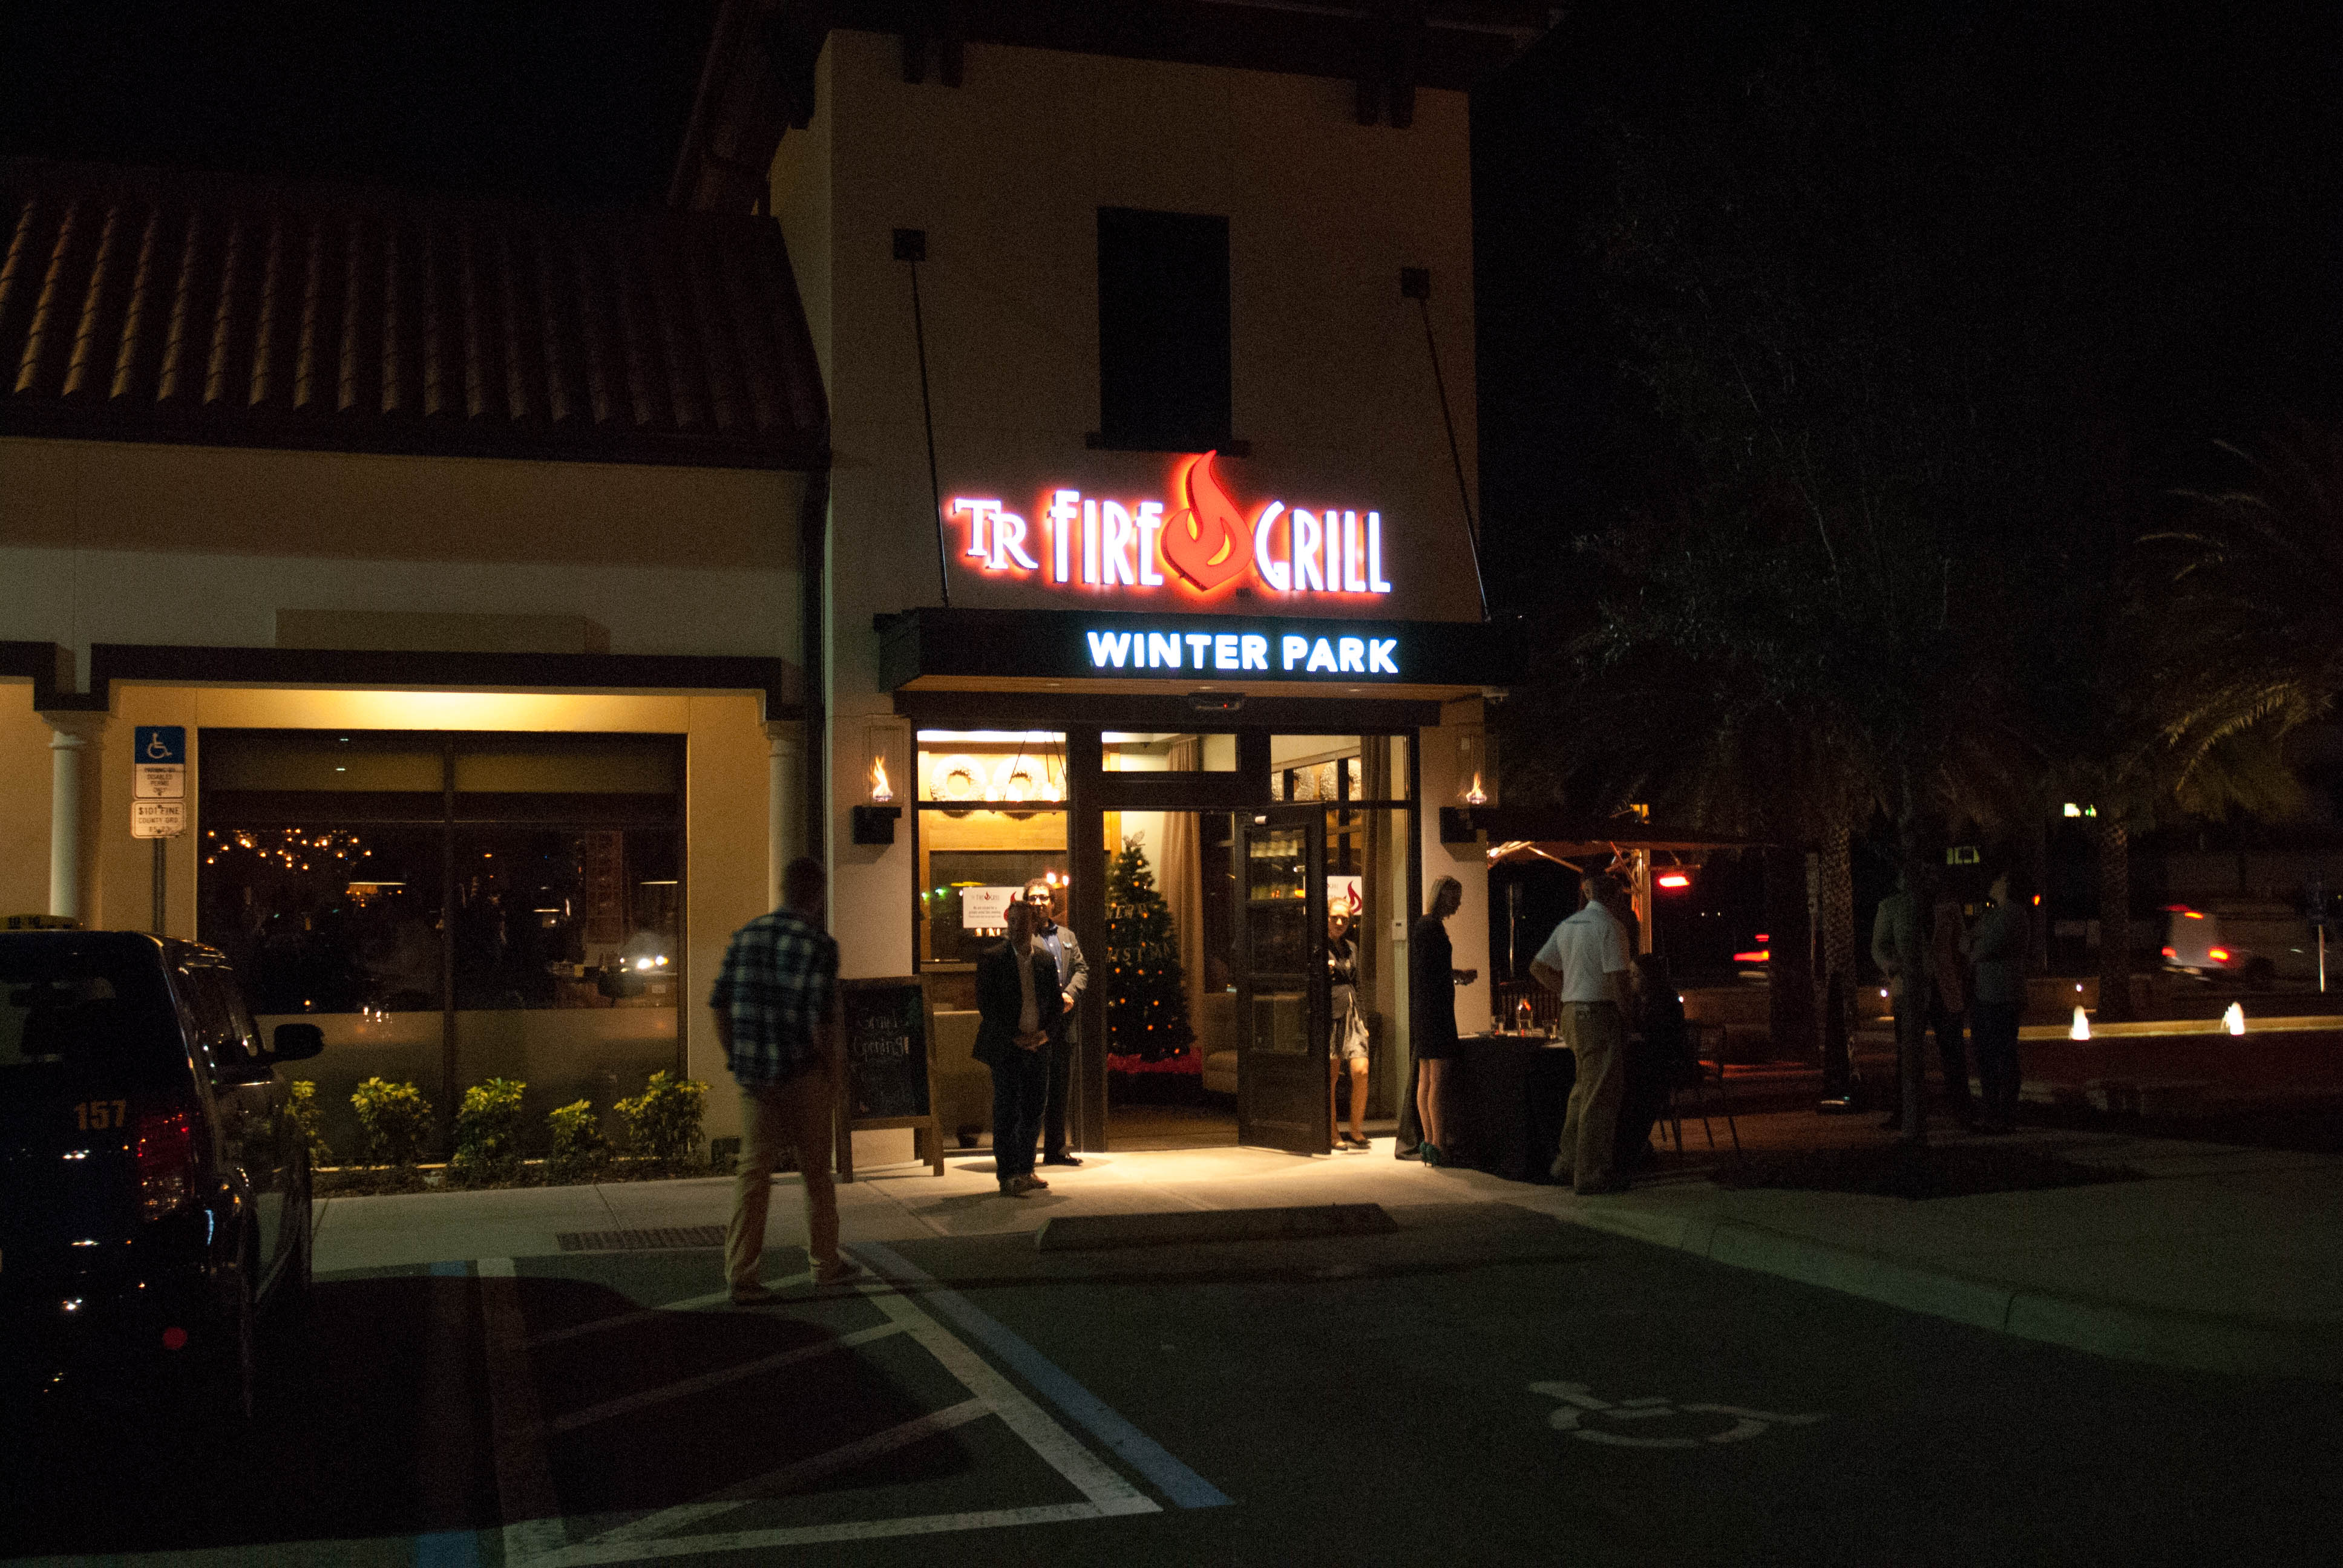 Grand Opening of TR Fire Grill Winter Park